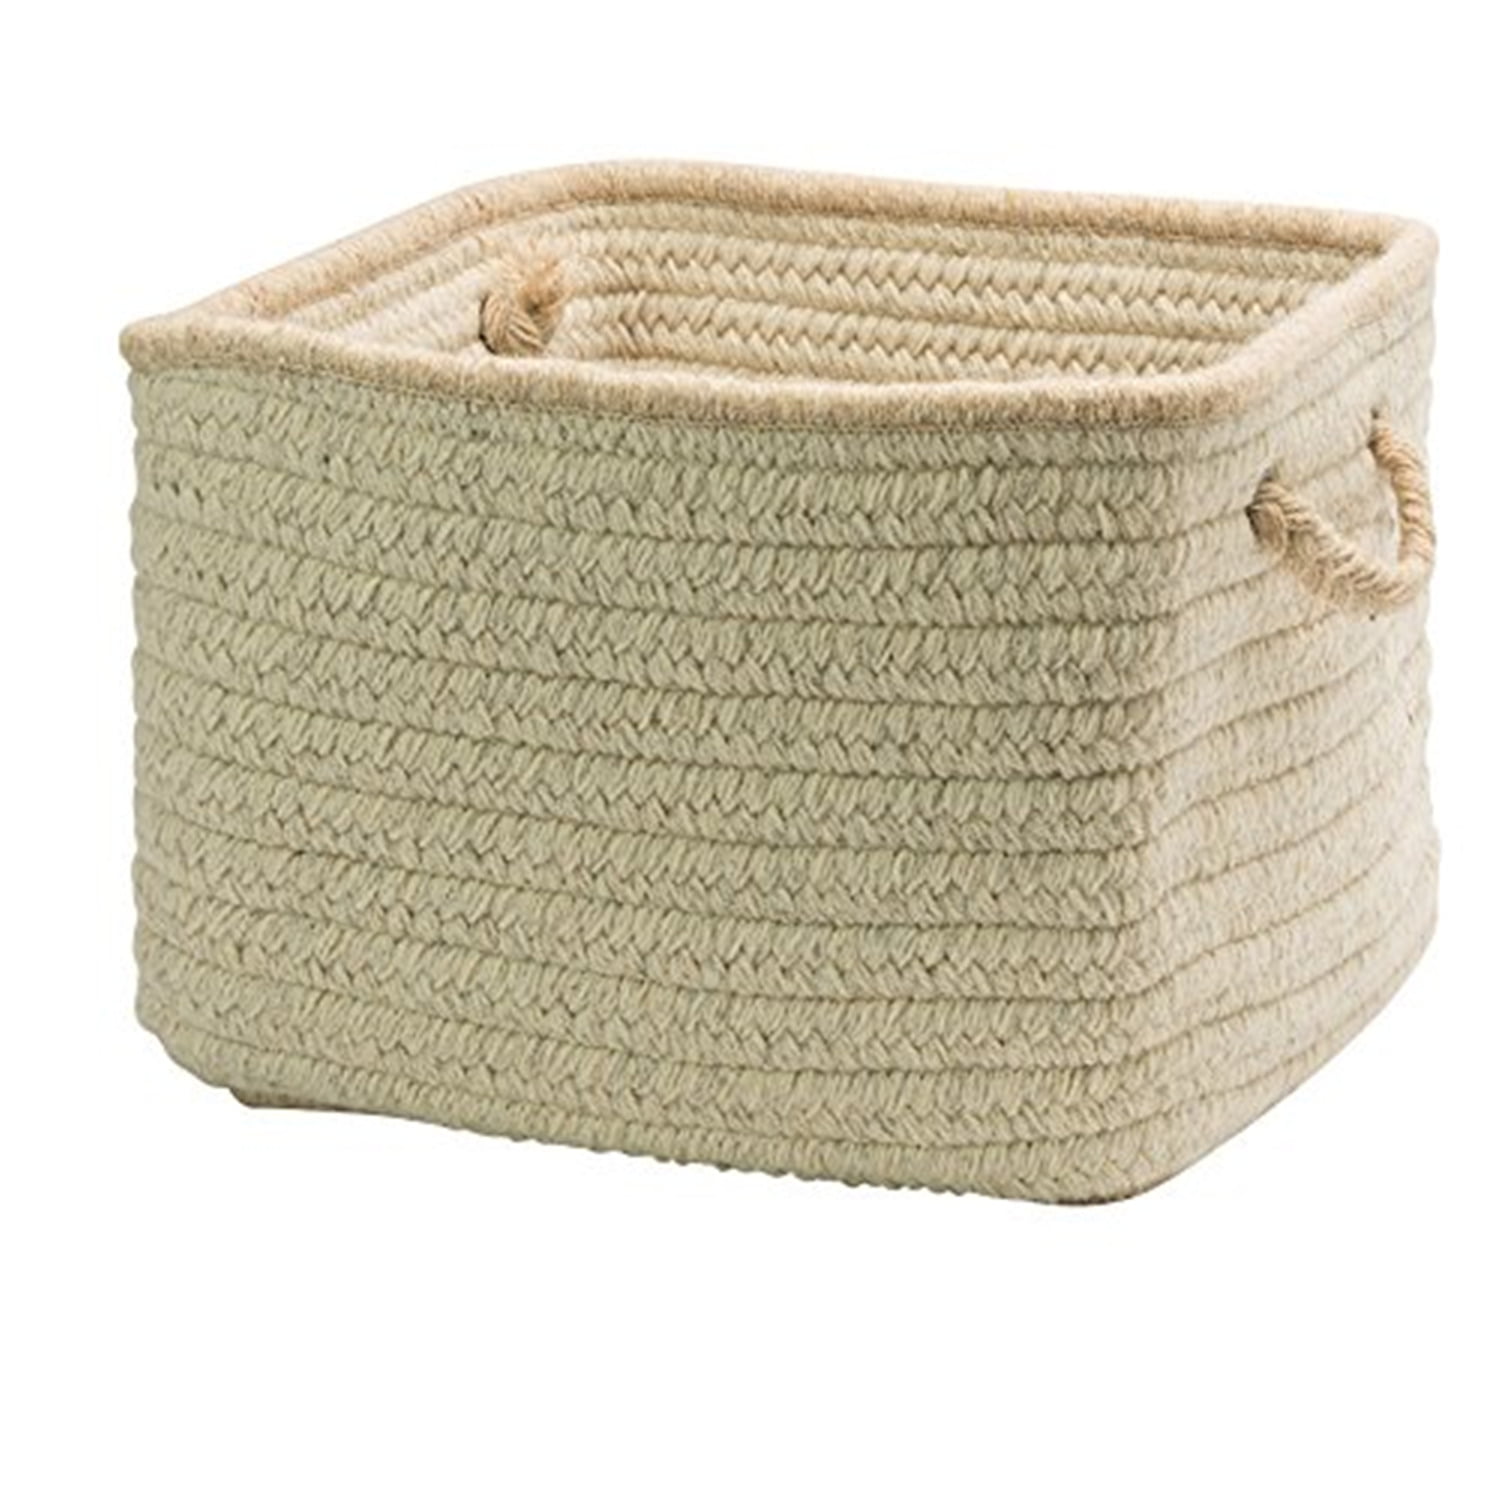 Ns00a014x010s 14 X 14 X 10 In. Natural Style Canvas Rectangular Basket